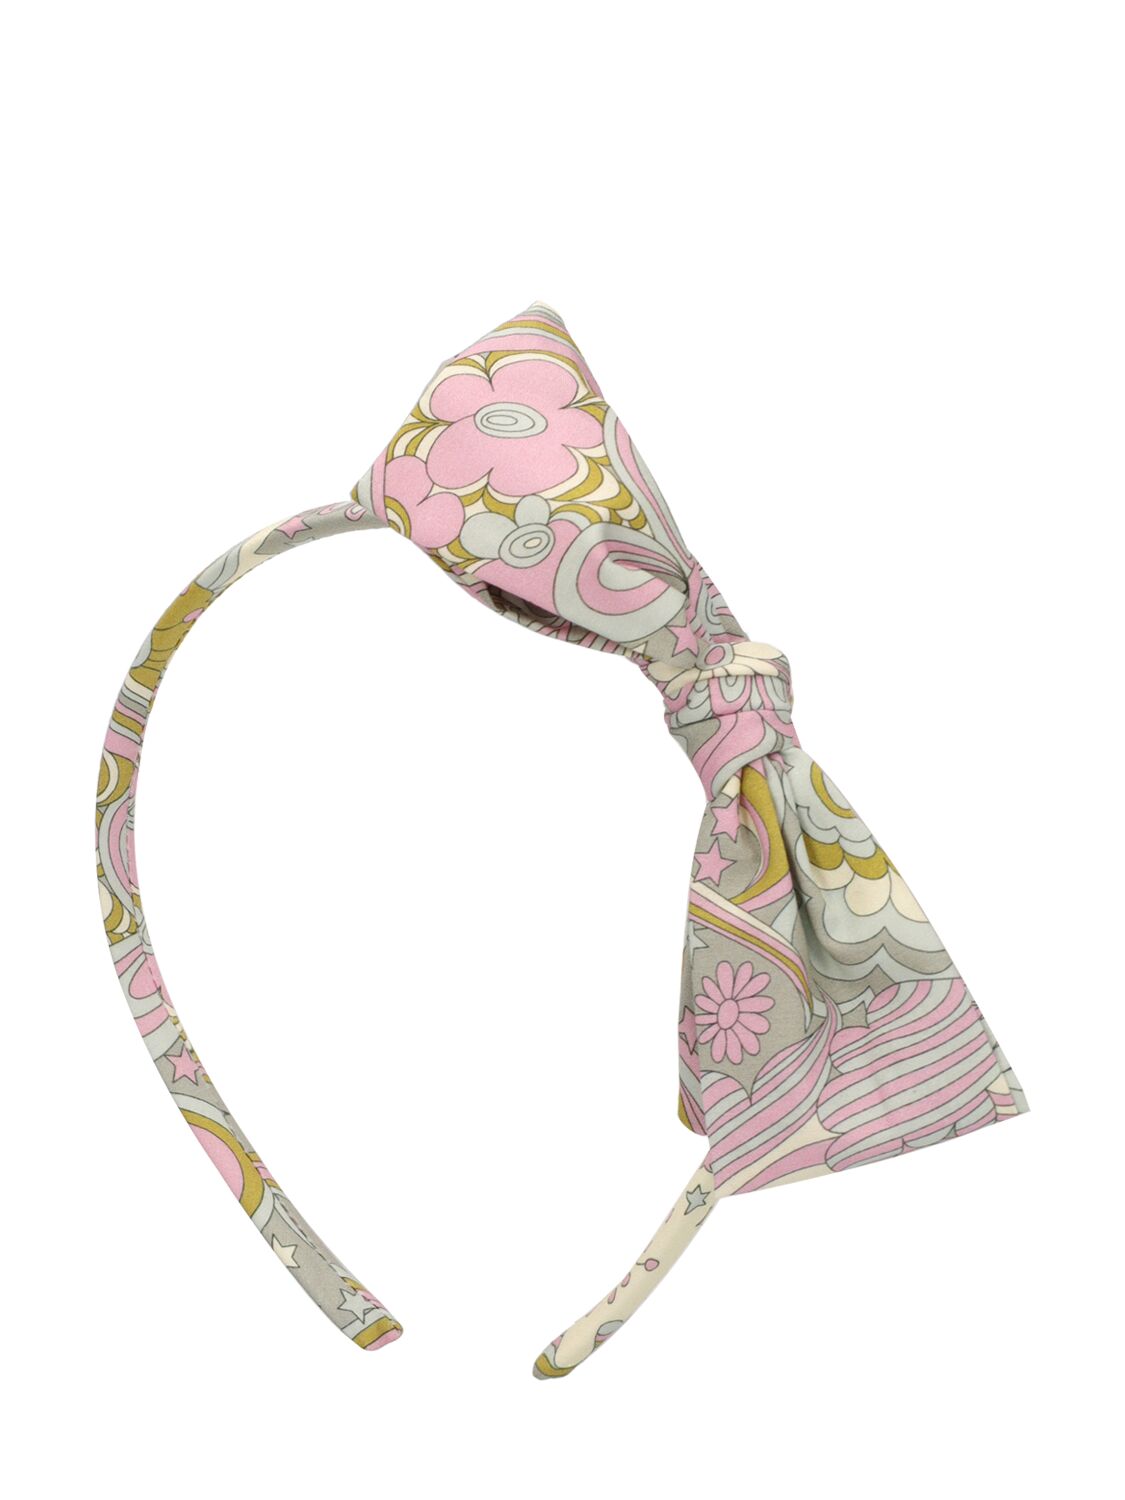 Bonpoint Kids' Printed Cotton Headband W/ Bow In Multicolor